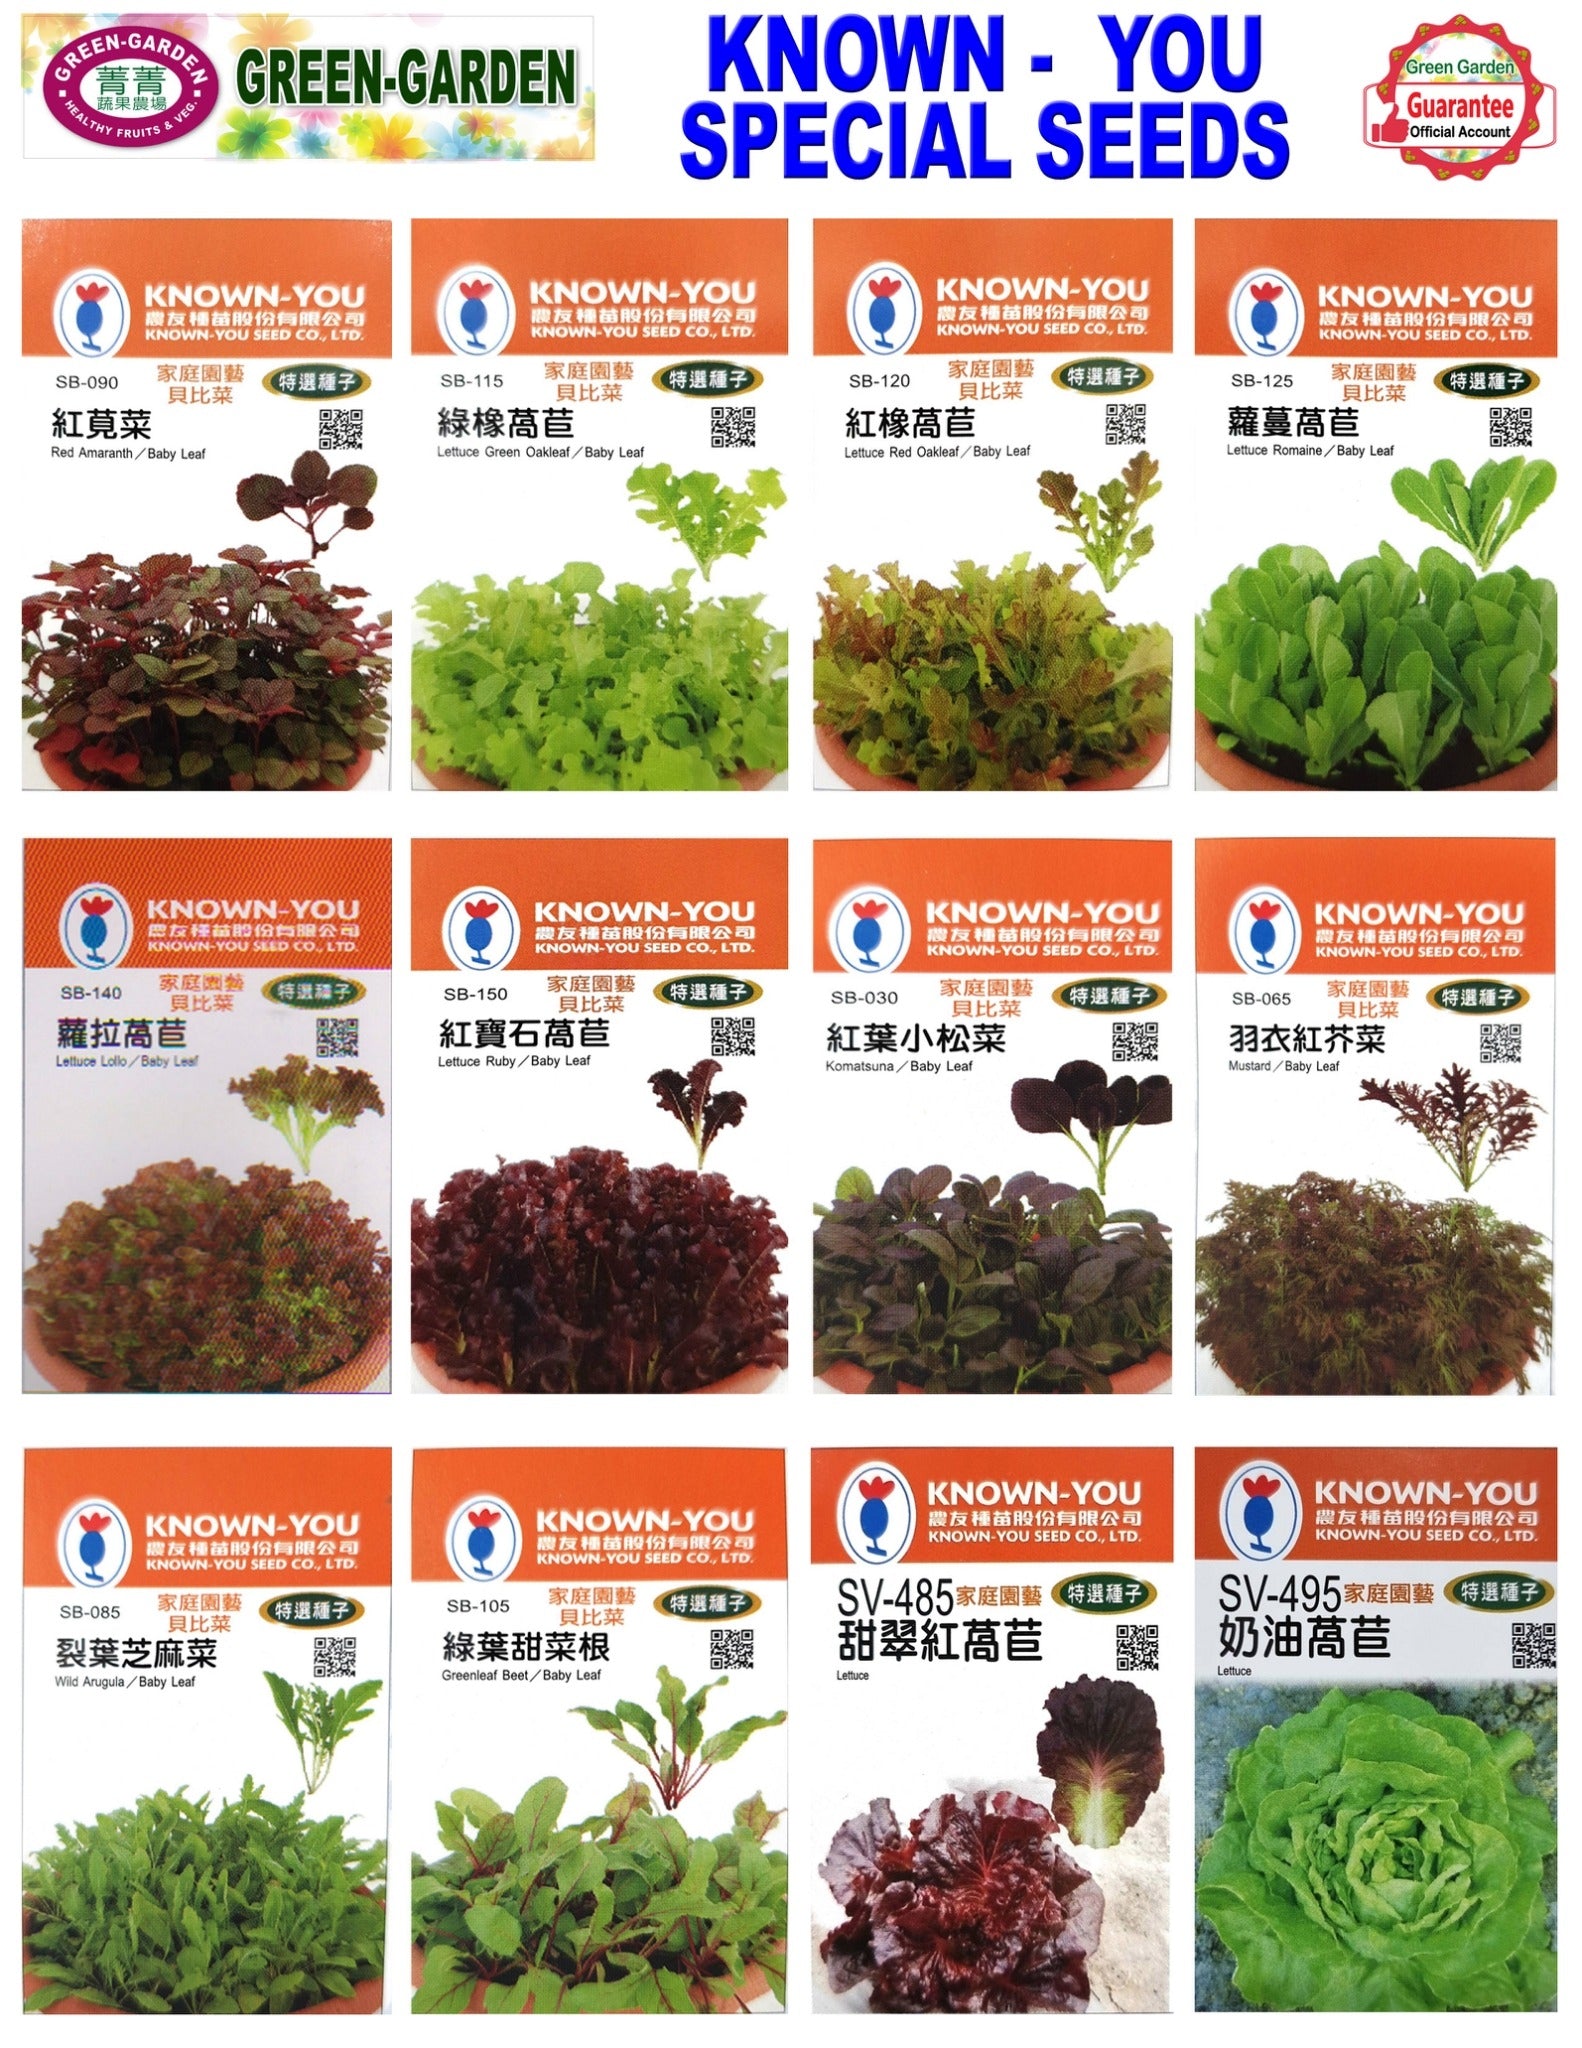 Known You Special Seeds (SV-510 Chinese Cabbage (red))